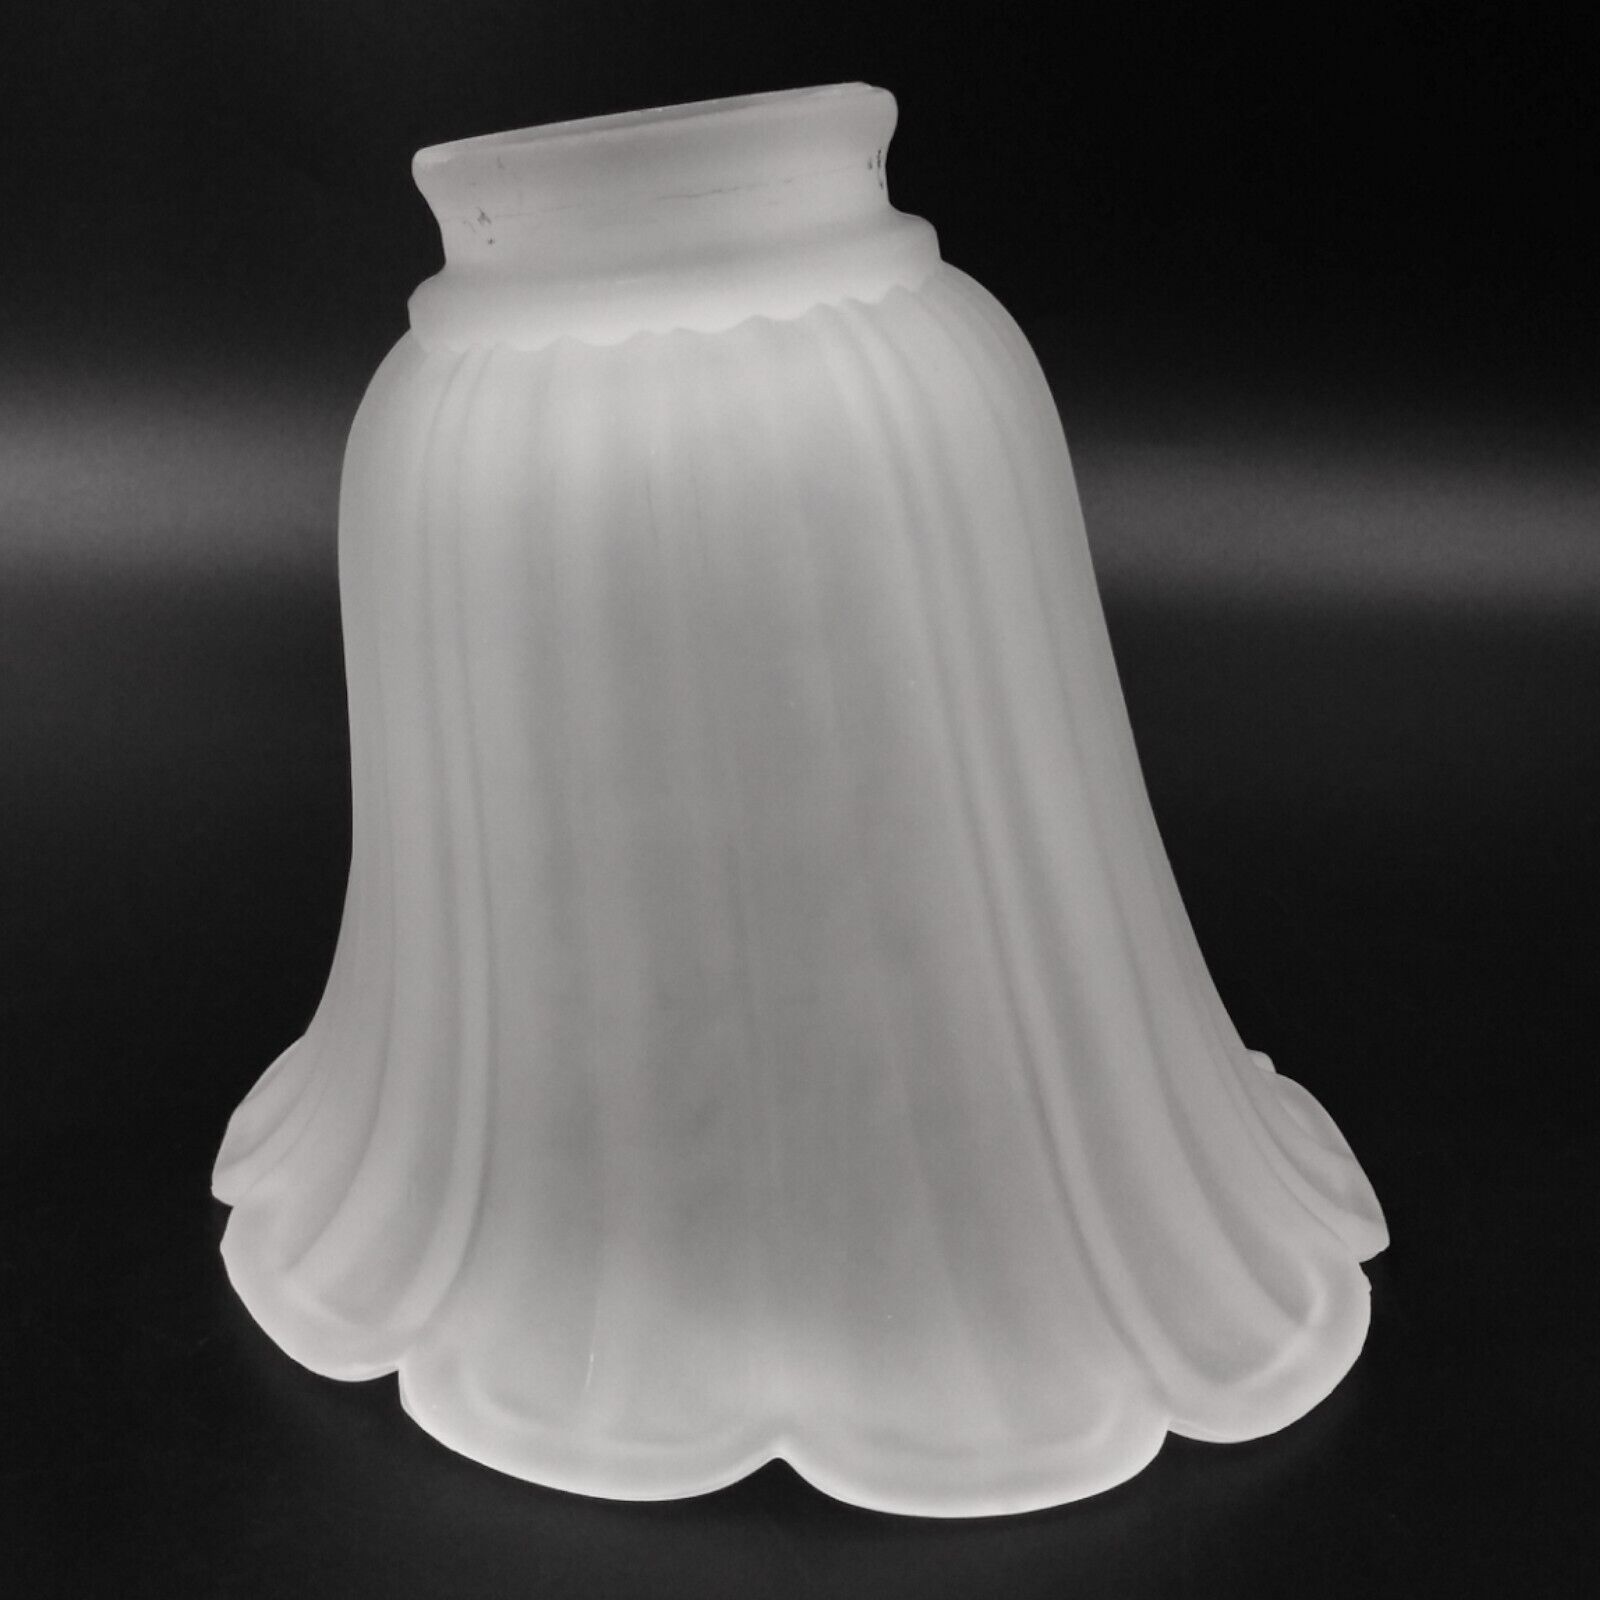 Asymmetrical Tulip Frosted Glass Light Lamp Shade Sconce Pendant Fixture